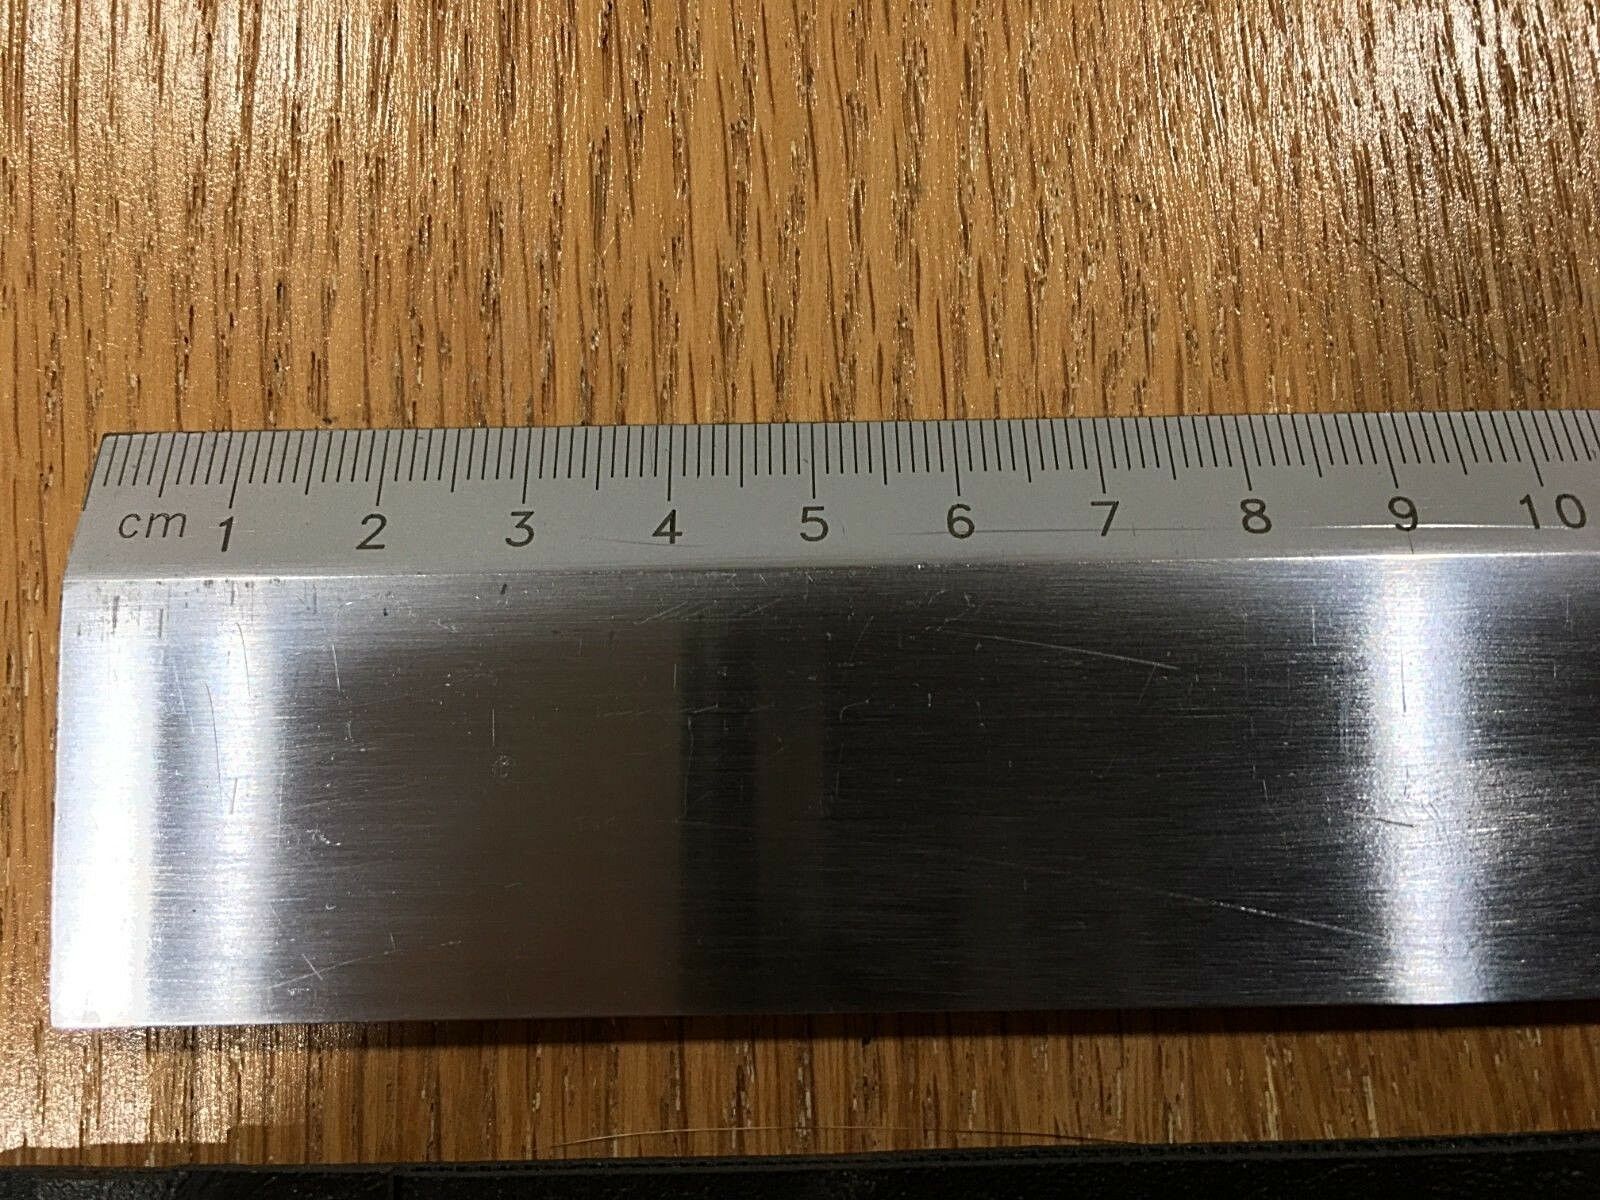 900mm iGaging Precision Straight Edge with Ruler